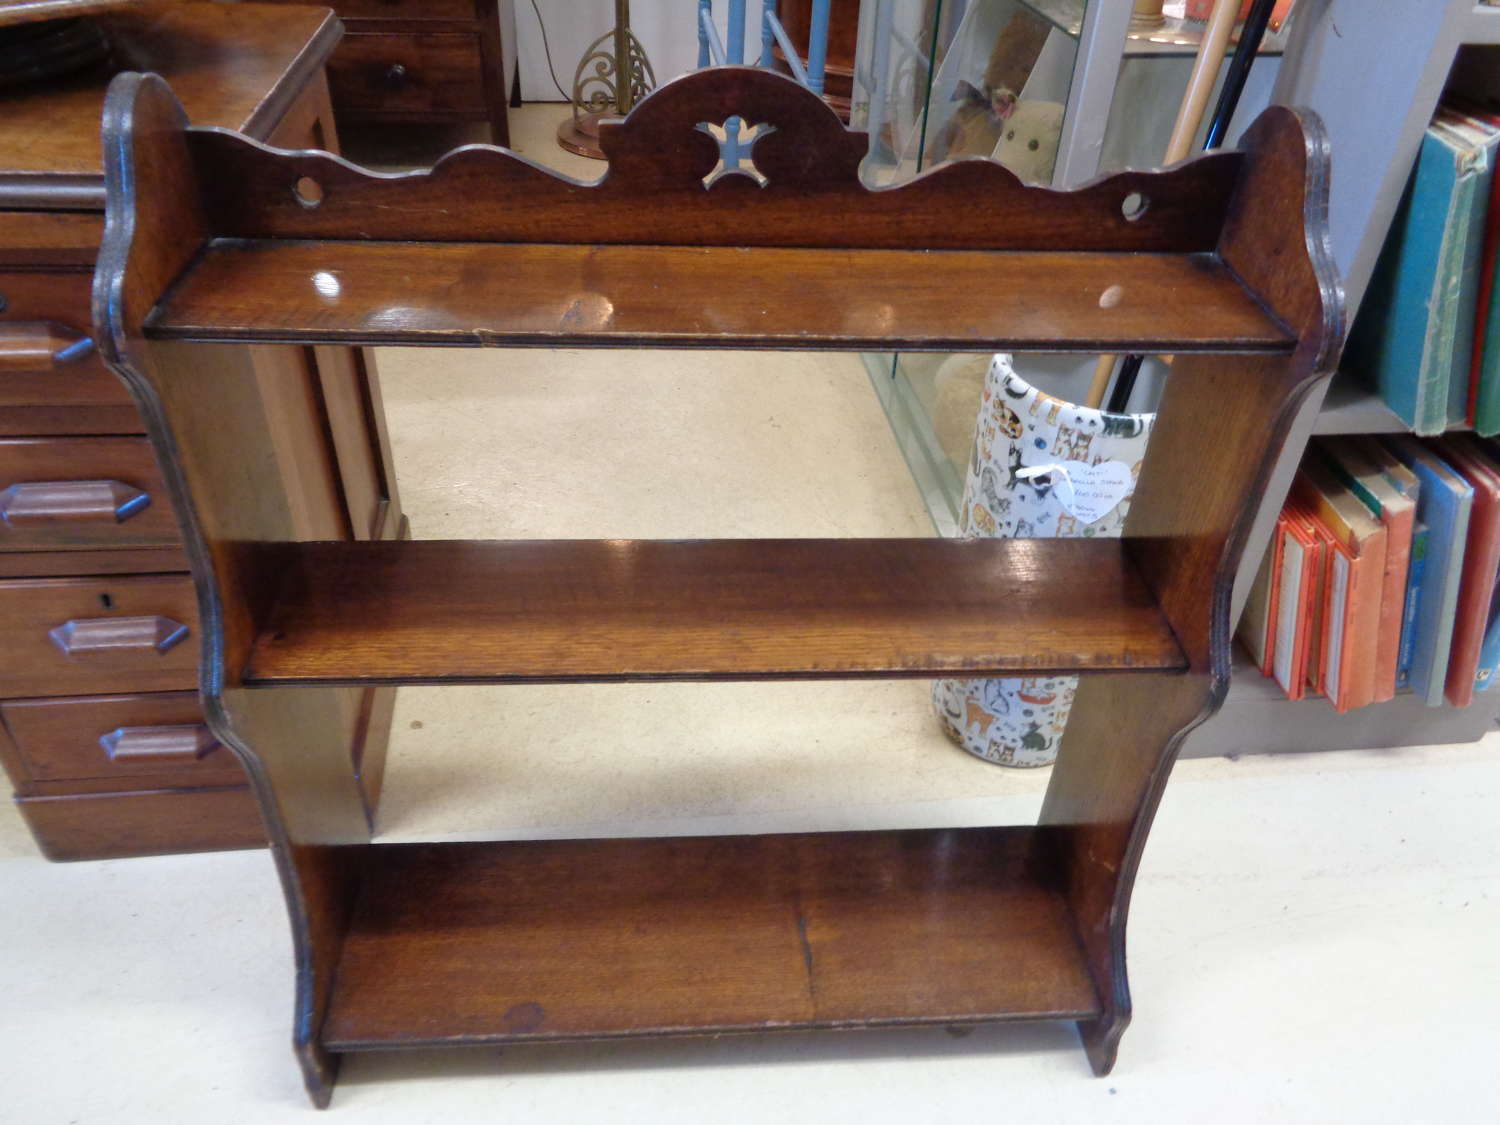 Antique Mahogany Shelves - Freestanding or Wall Hanging